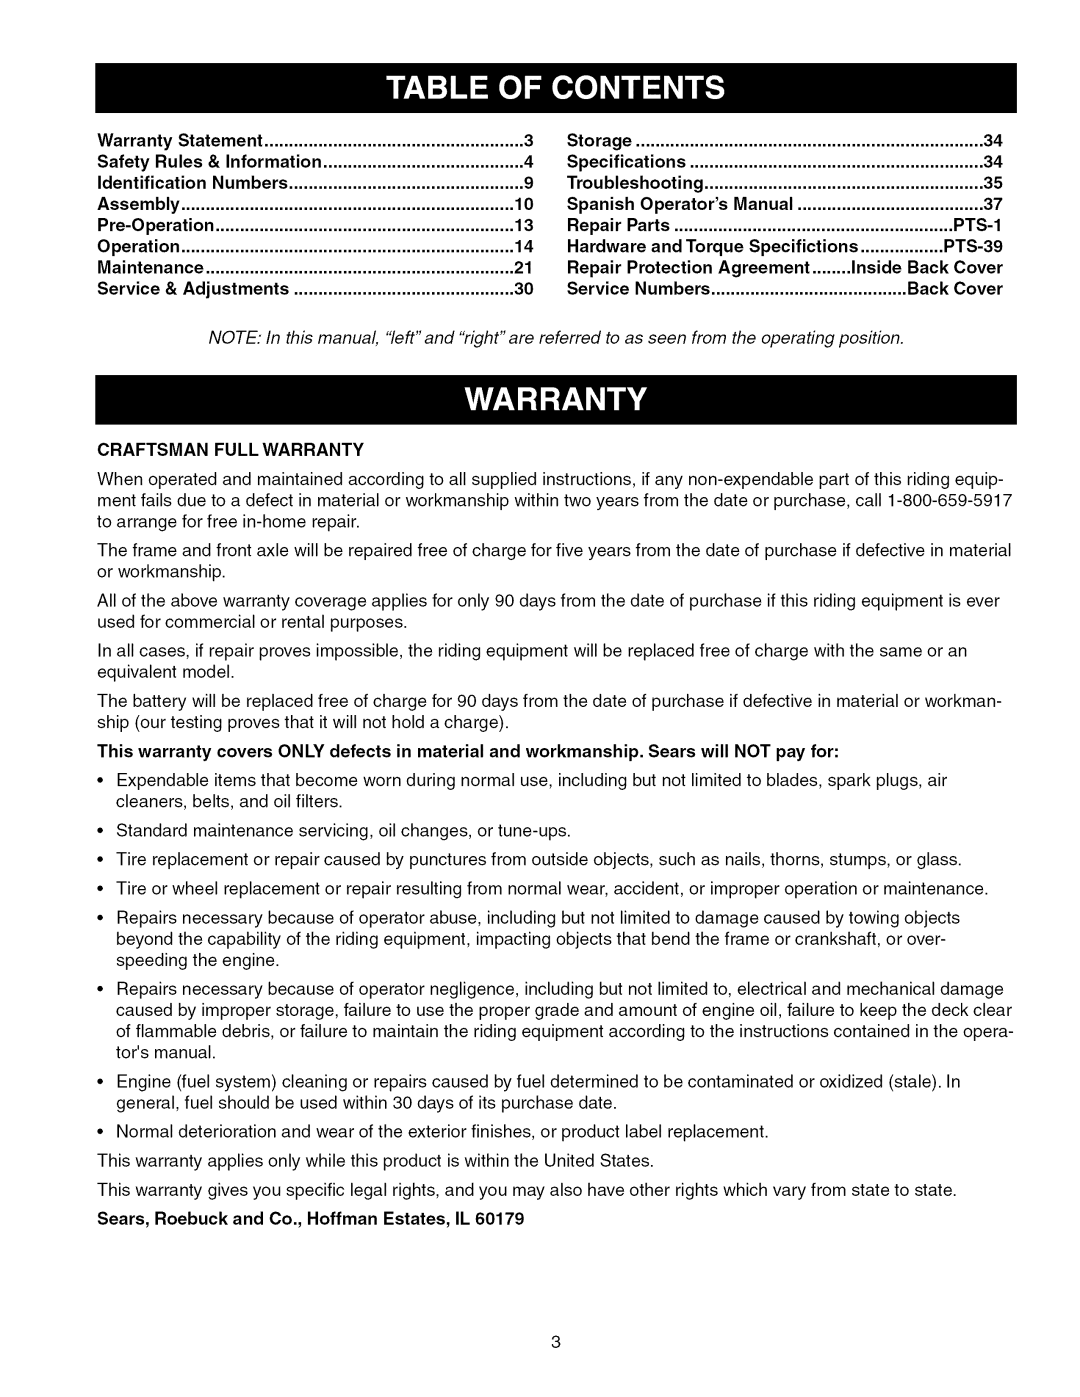 Craftsman ZTS 6000 manual Warranty Statement, Storage, Safety Rules, Information, Identification, Numbers, Assembly, Repair 